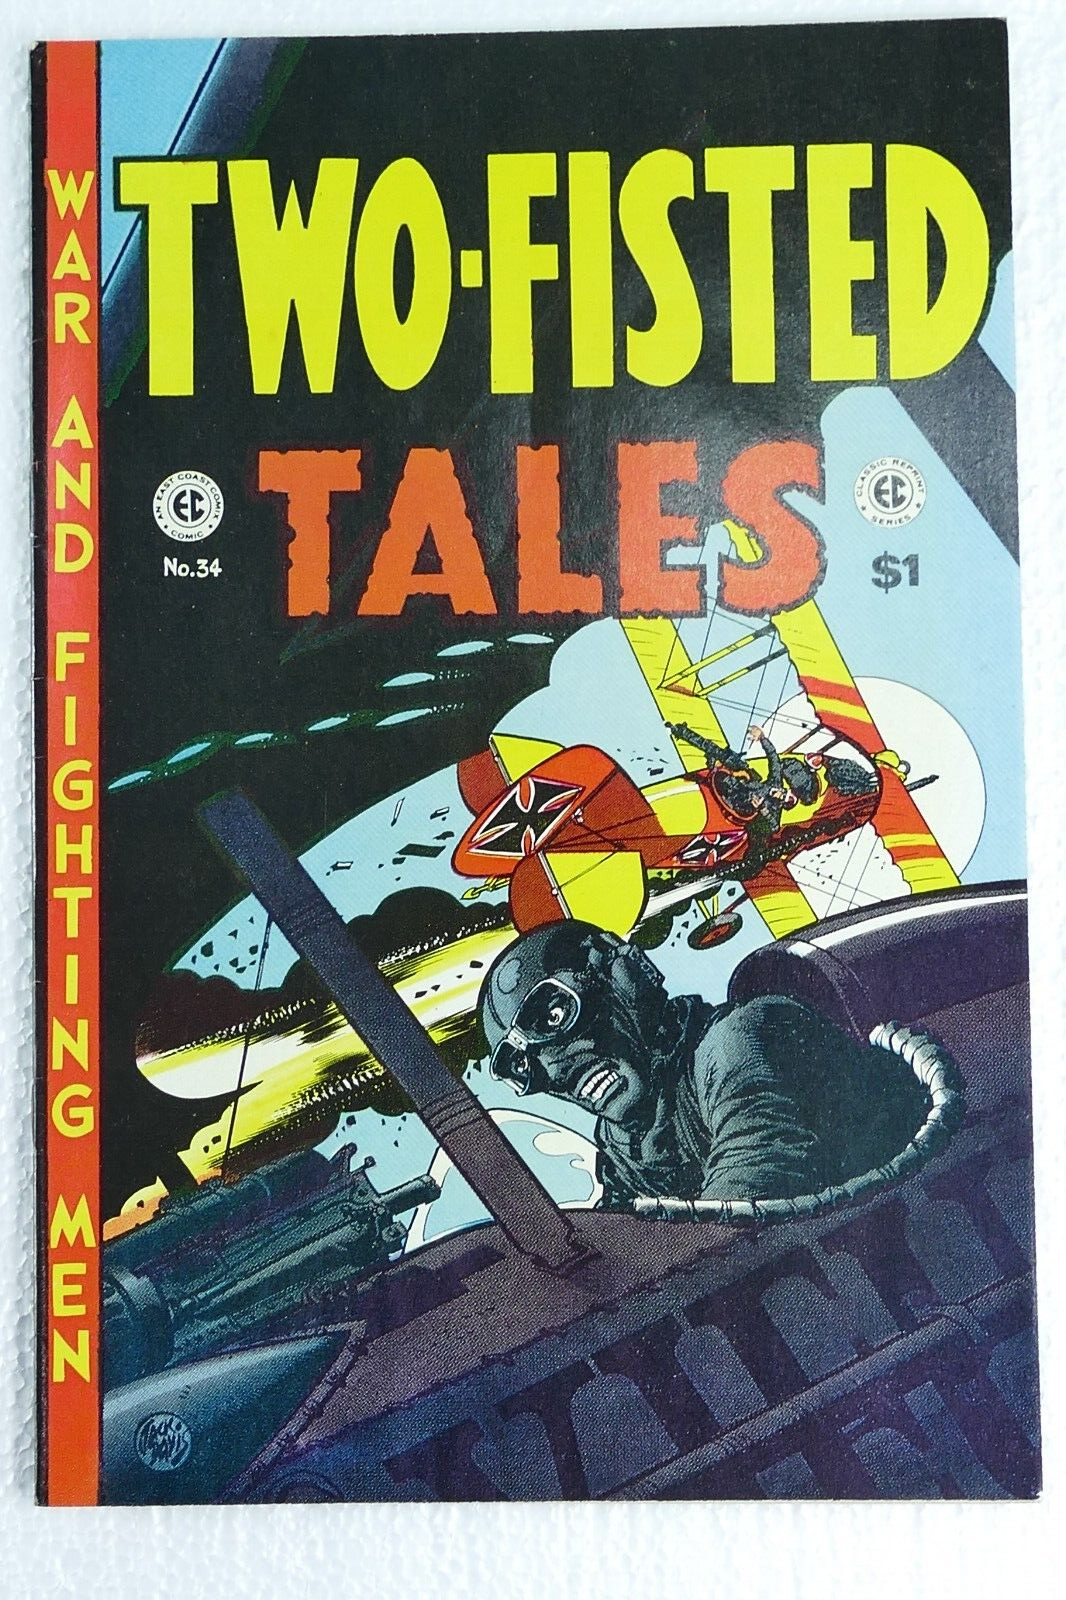 EC Classic Reprints #9 1974 TWO FISTED TALES #34 REPRINT VERY FINE+